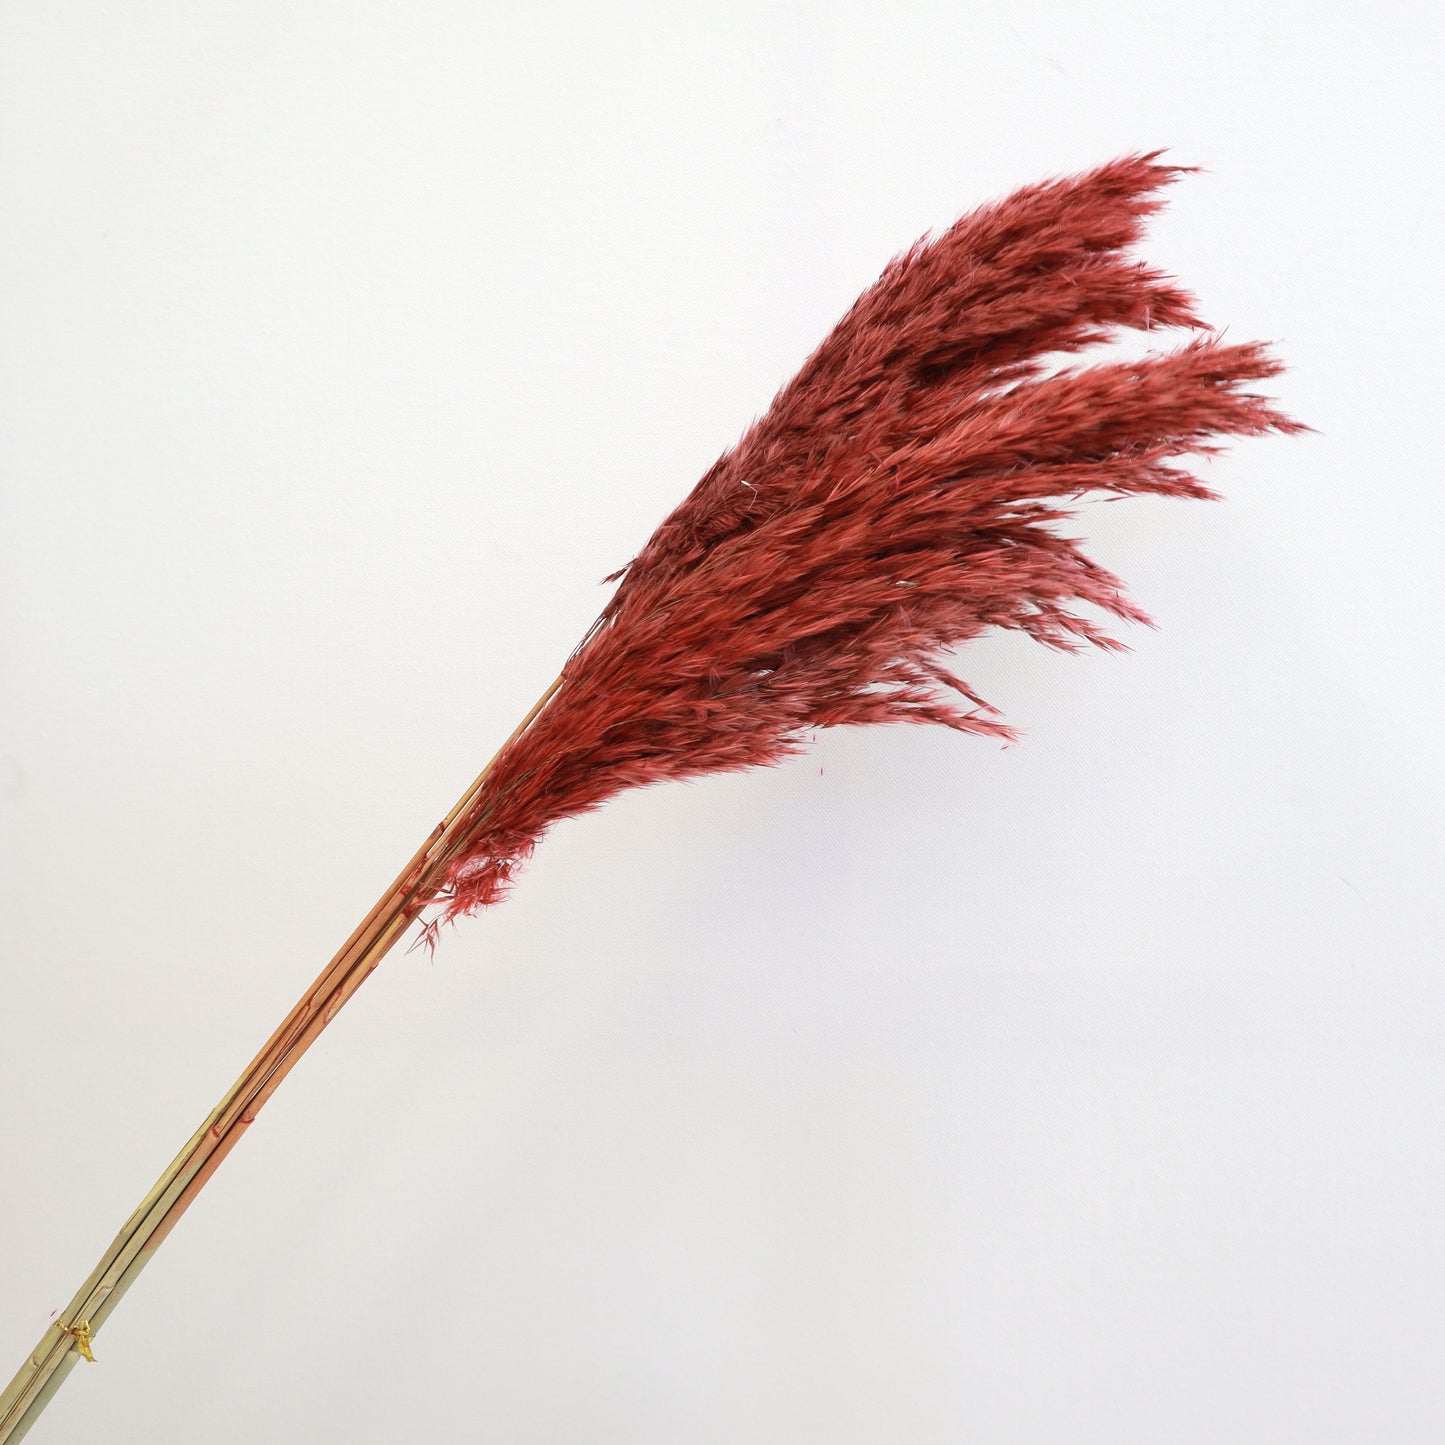 Giant Reeds Grass Red